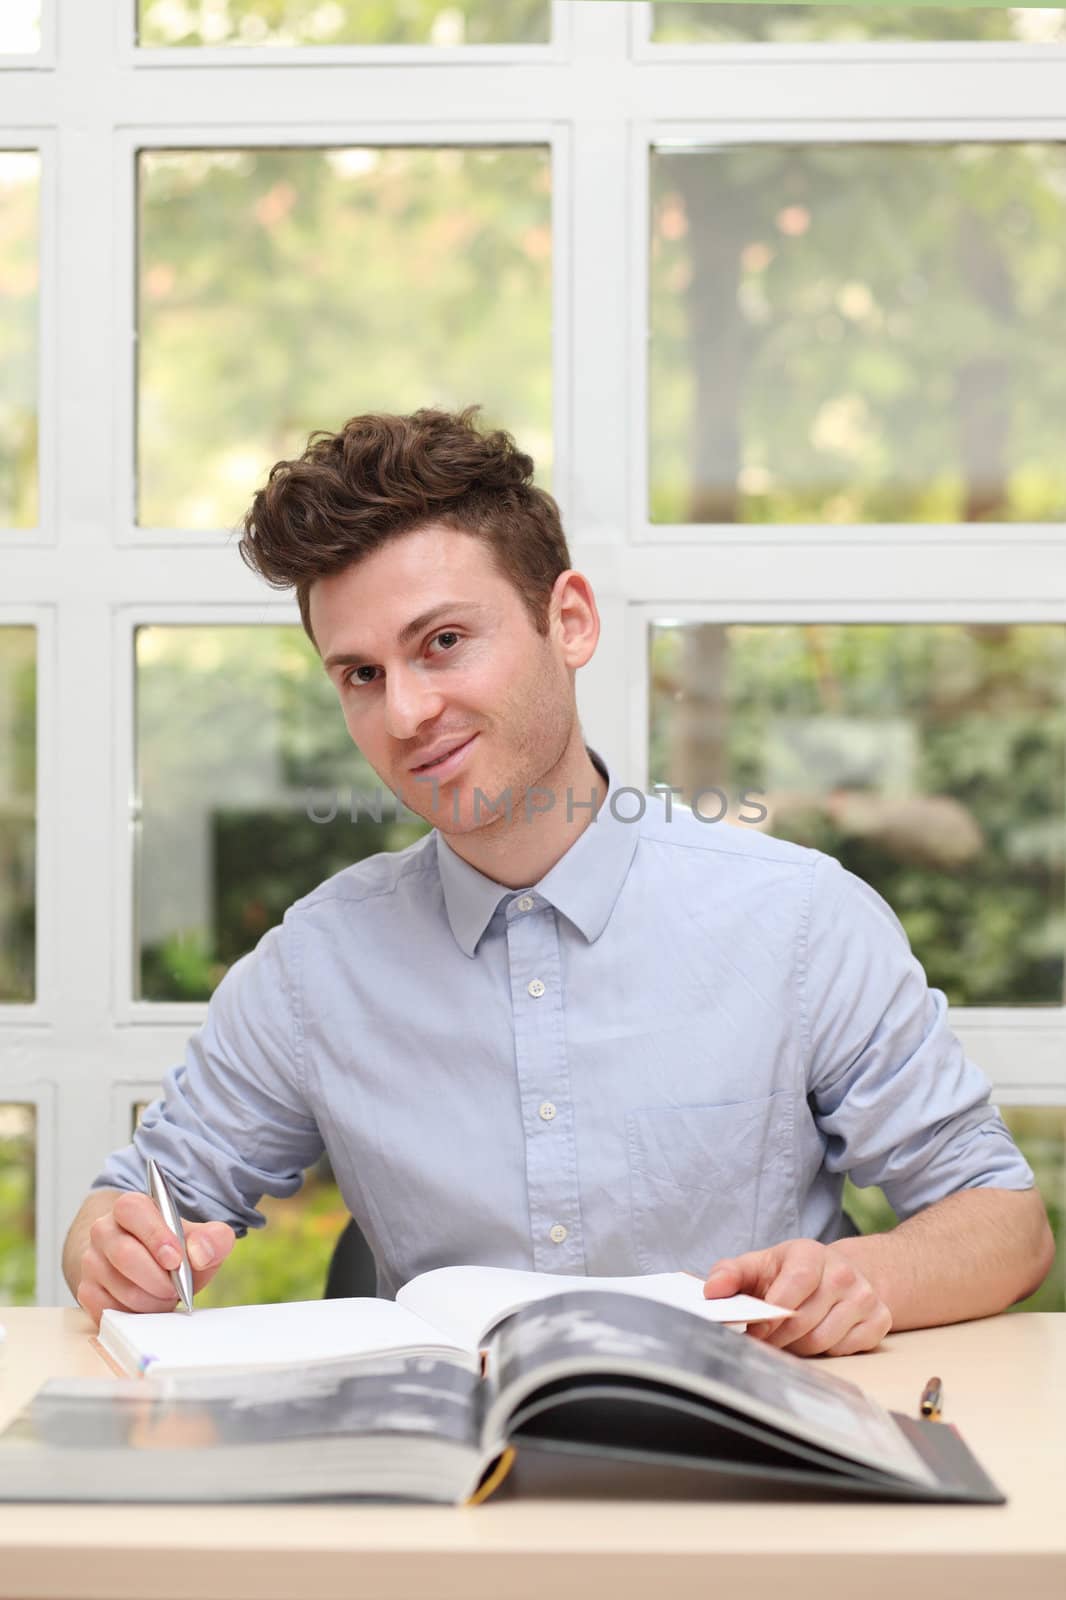 Young adult man writing notes with pen